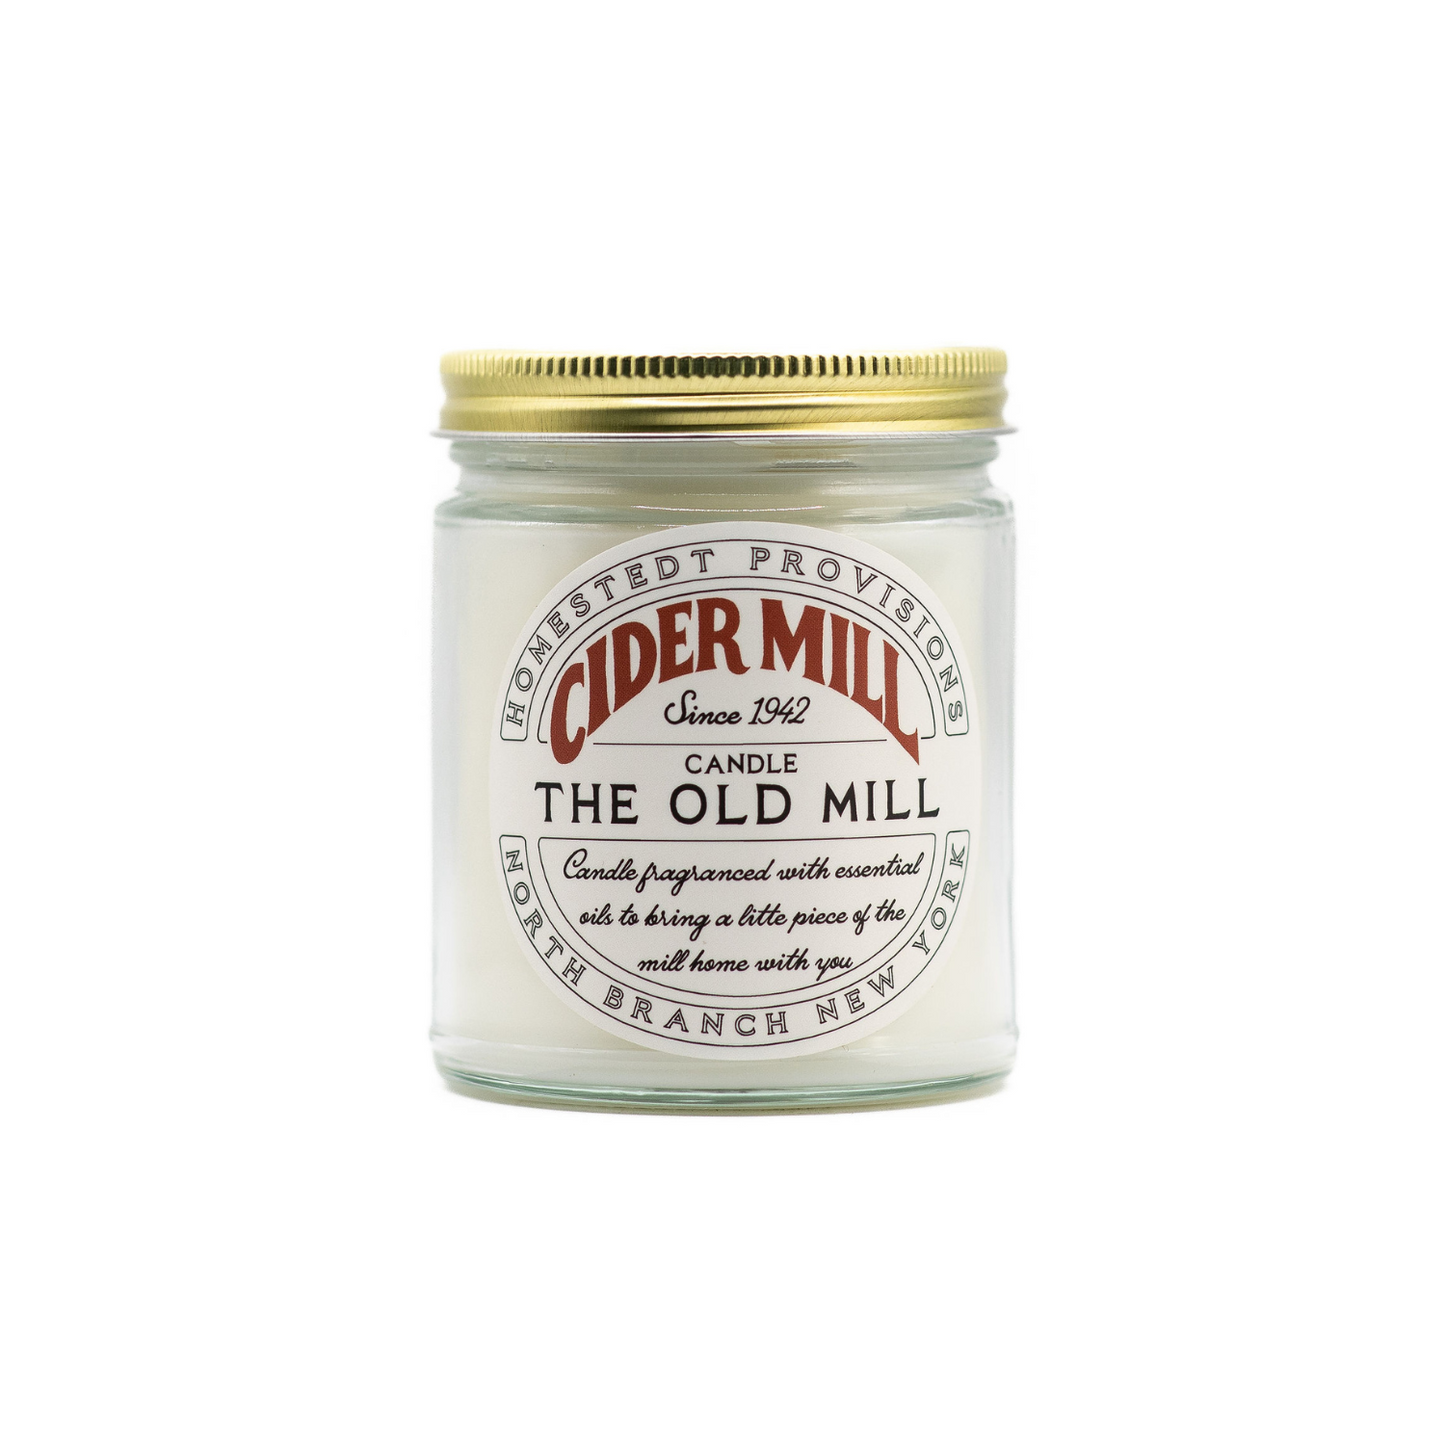 Cider Mill Old Mill Candle